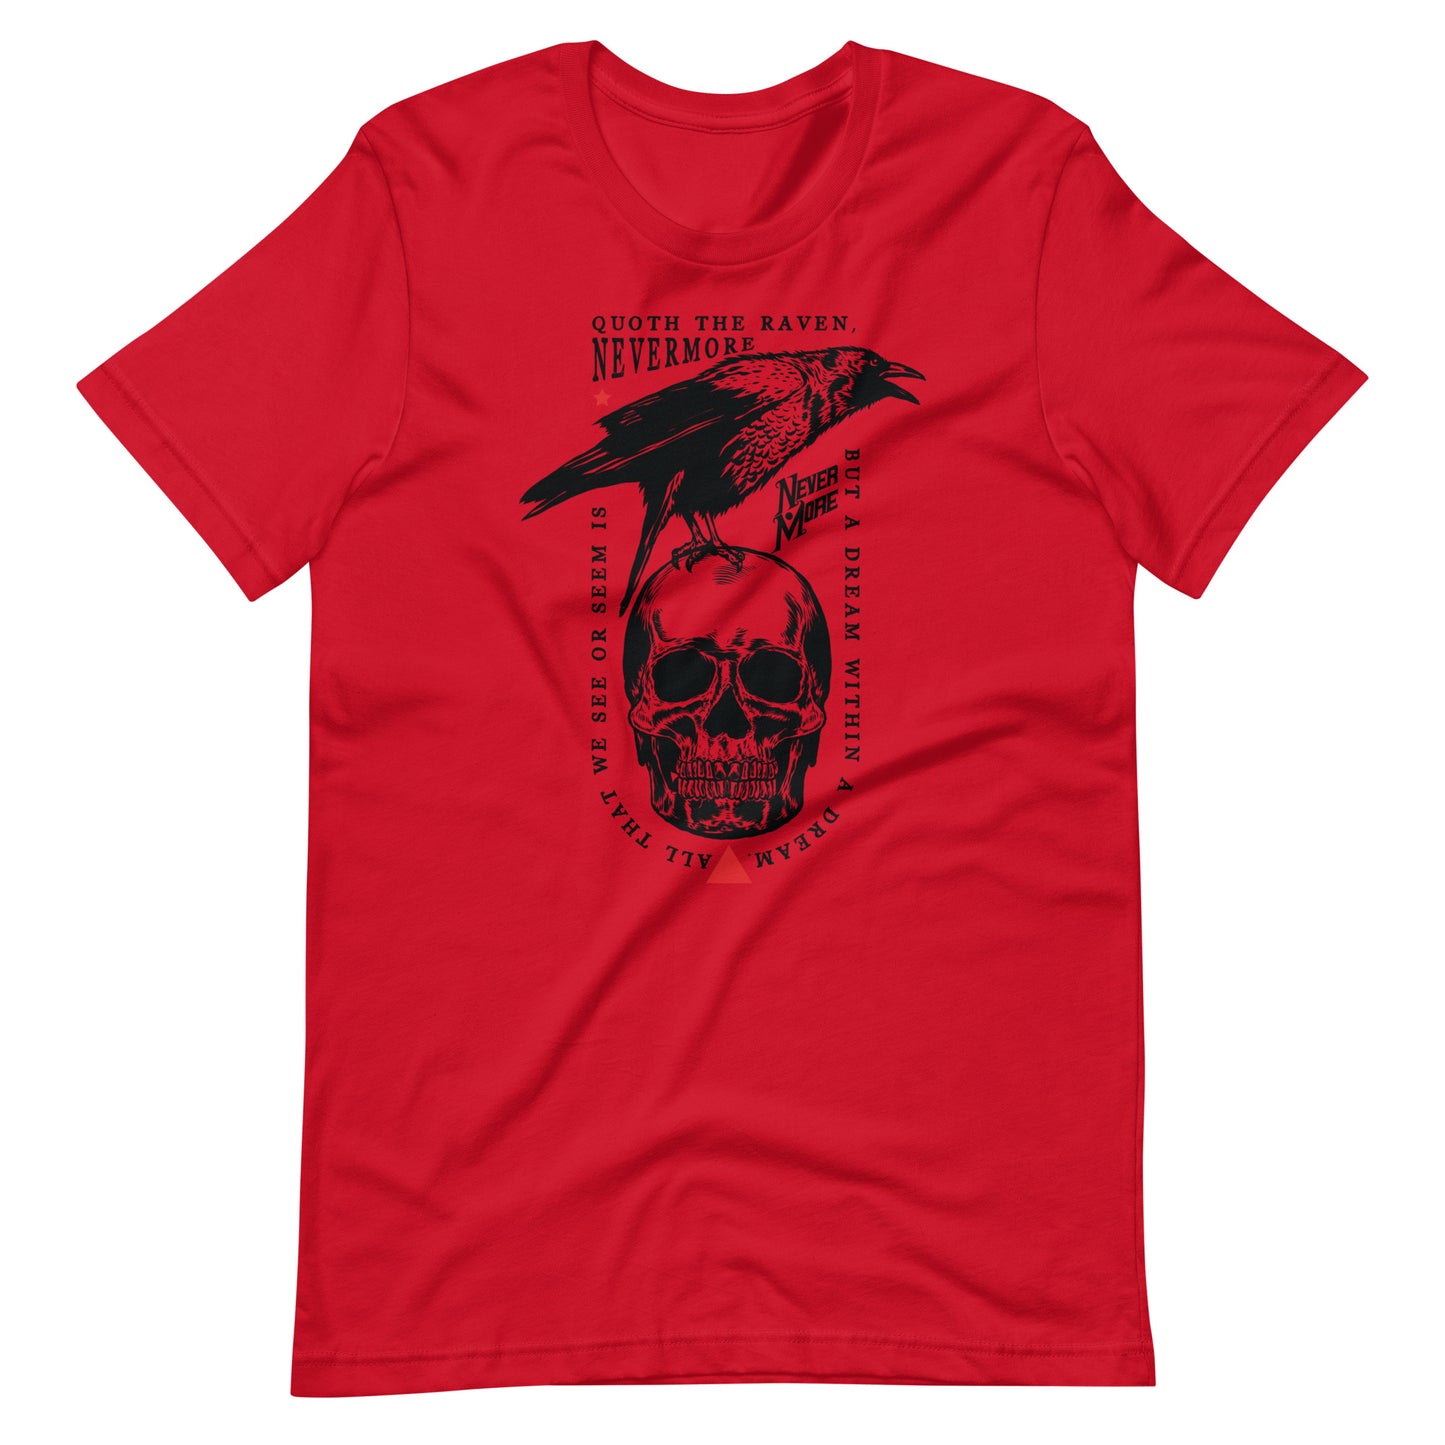 Quoth the Raven - Men's t-shirt - Red Front